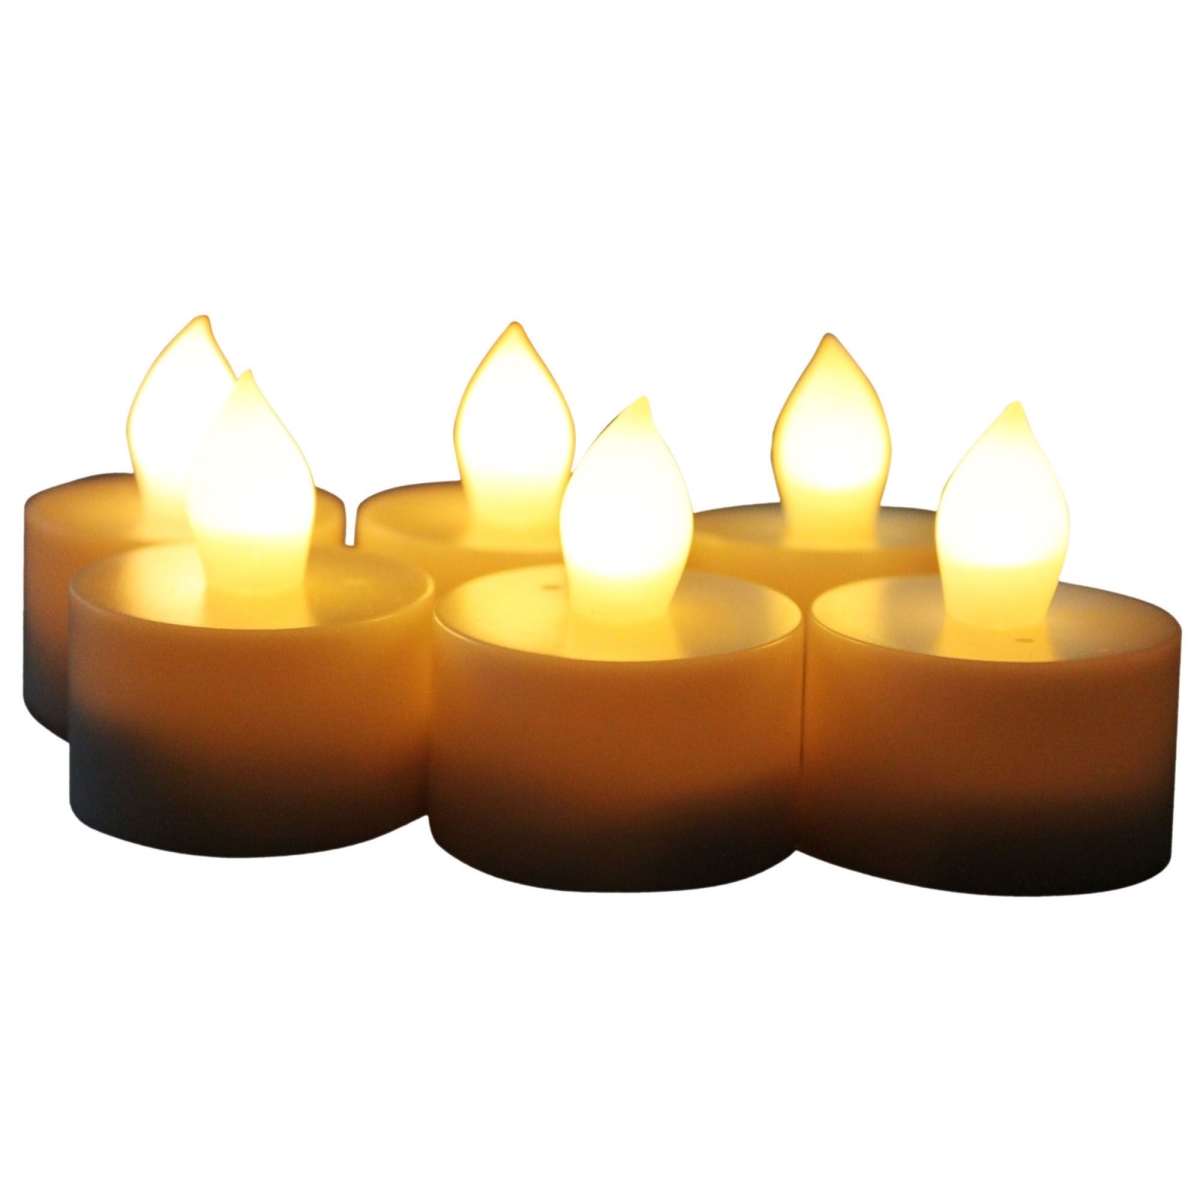 Indoor & Outdoor Flameless Led Tealight Candles With 4 Or 8 Hour Timer - Set Of 6